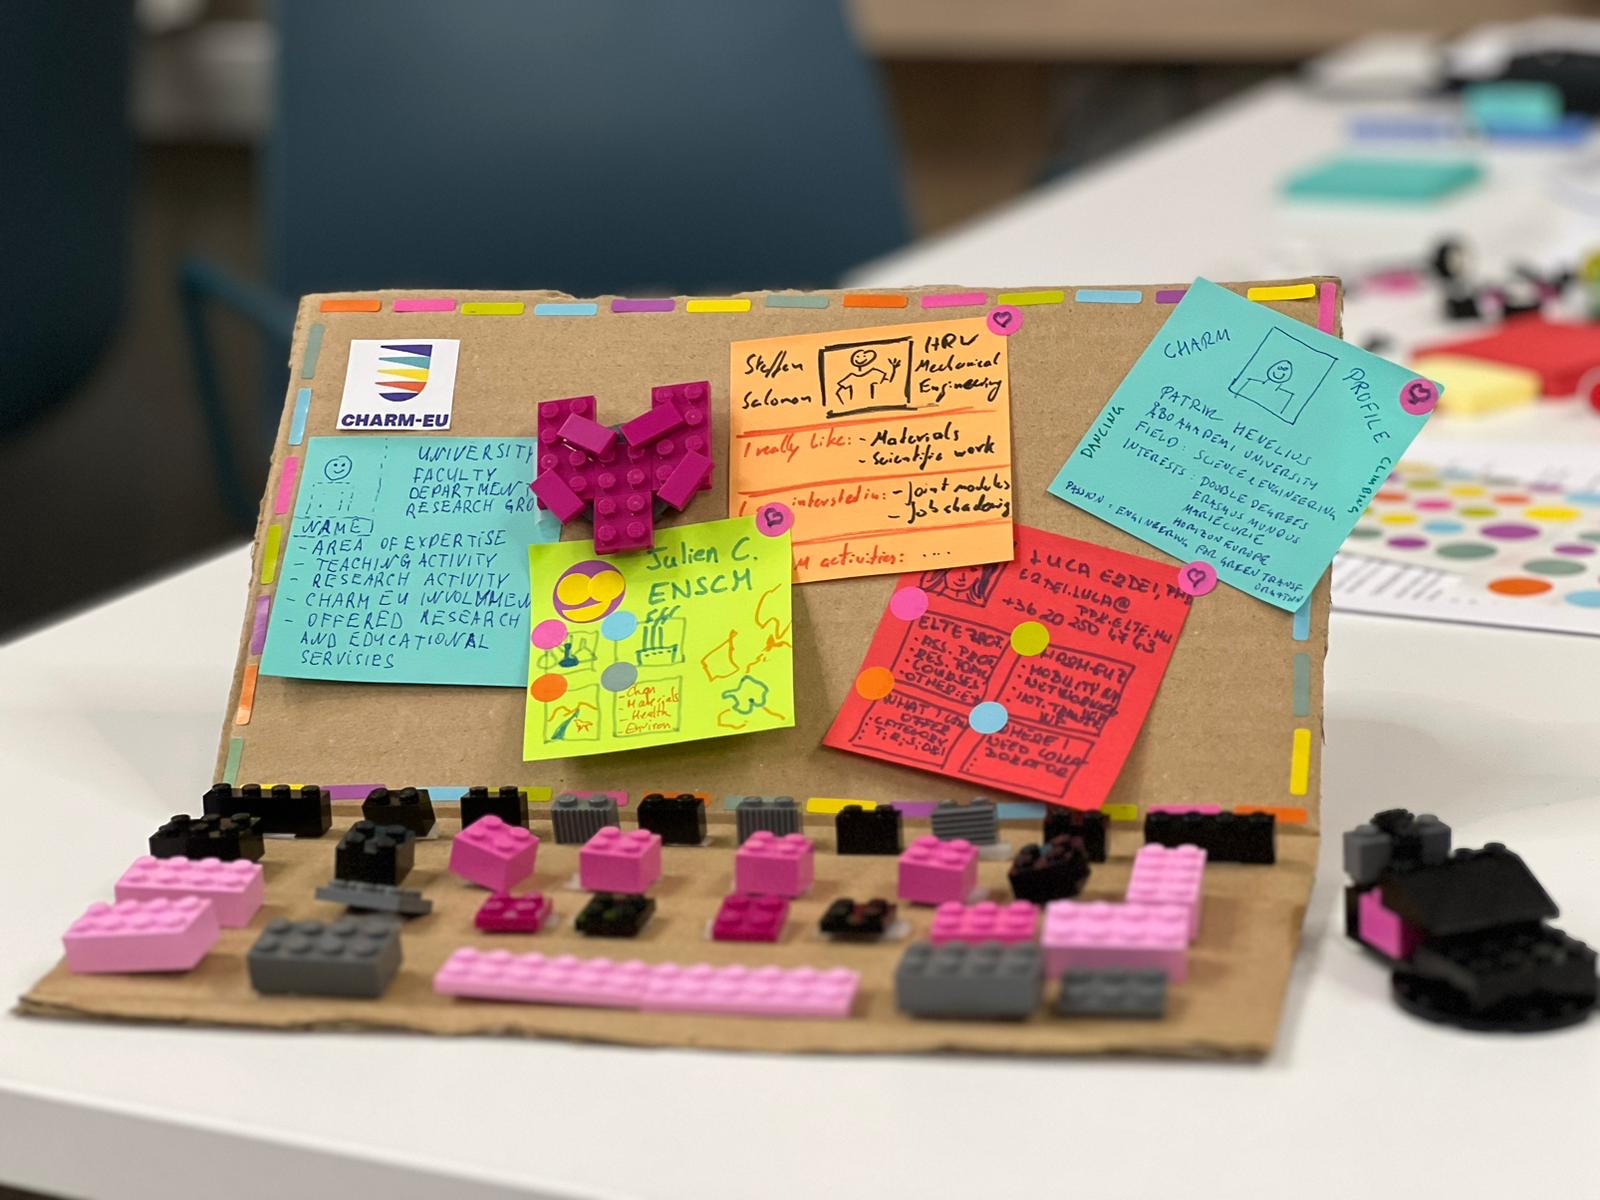 Example of result of the Design Thinking approach in the form of a mock-up with Lego and sticky notes